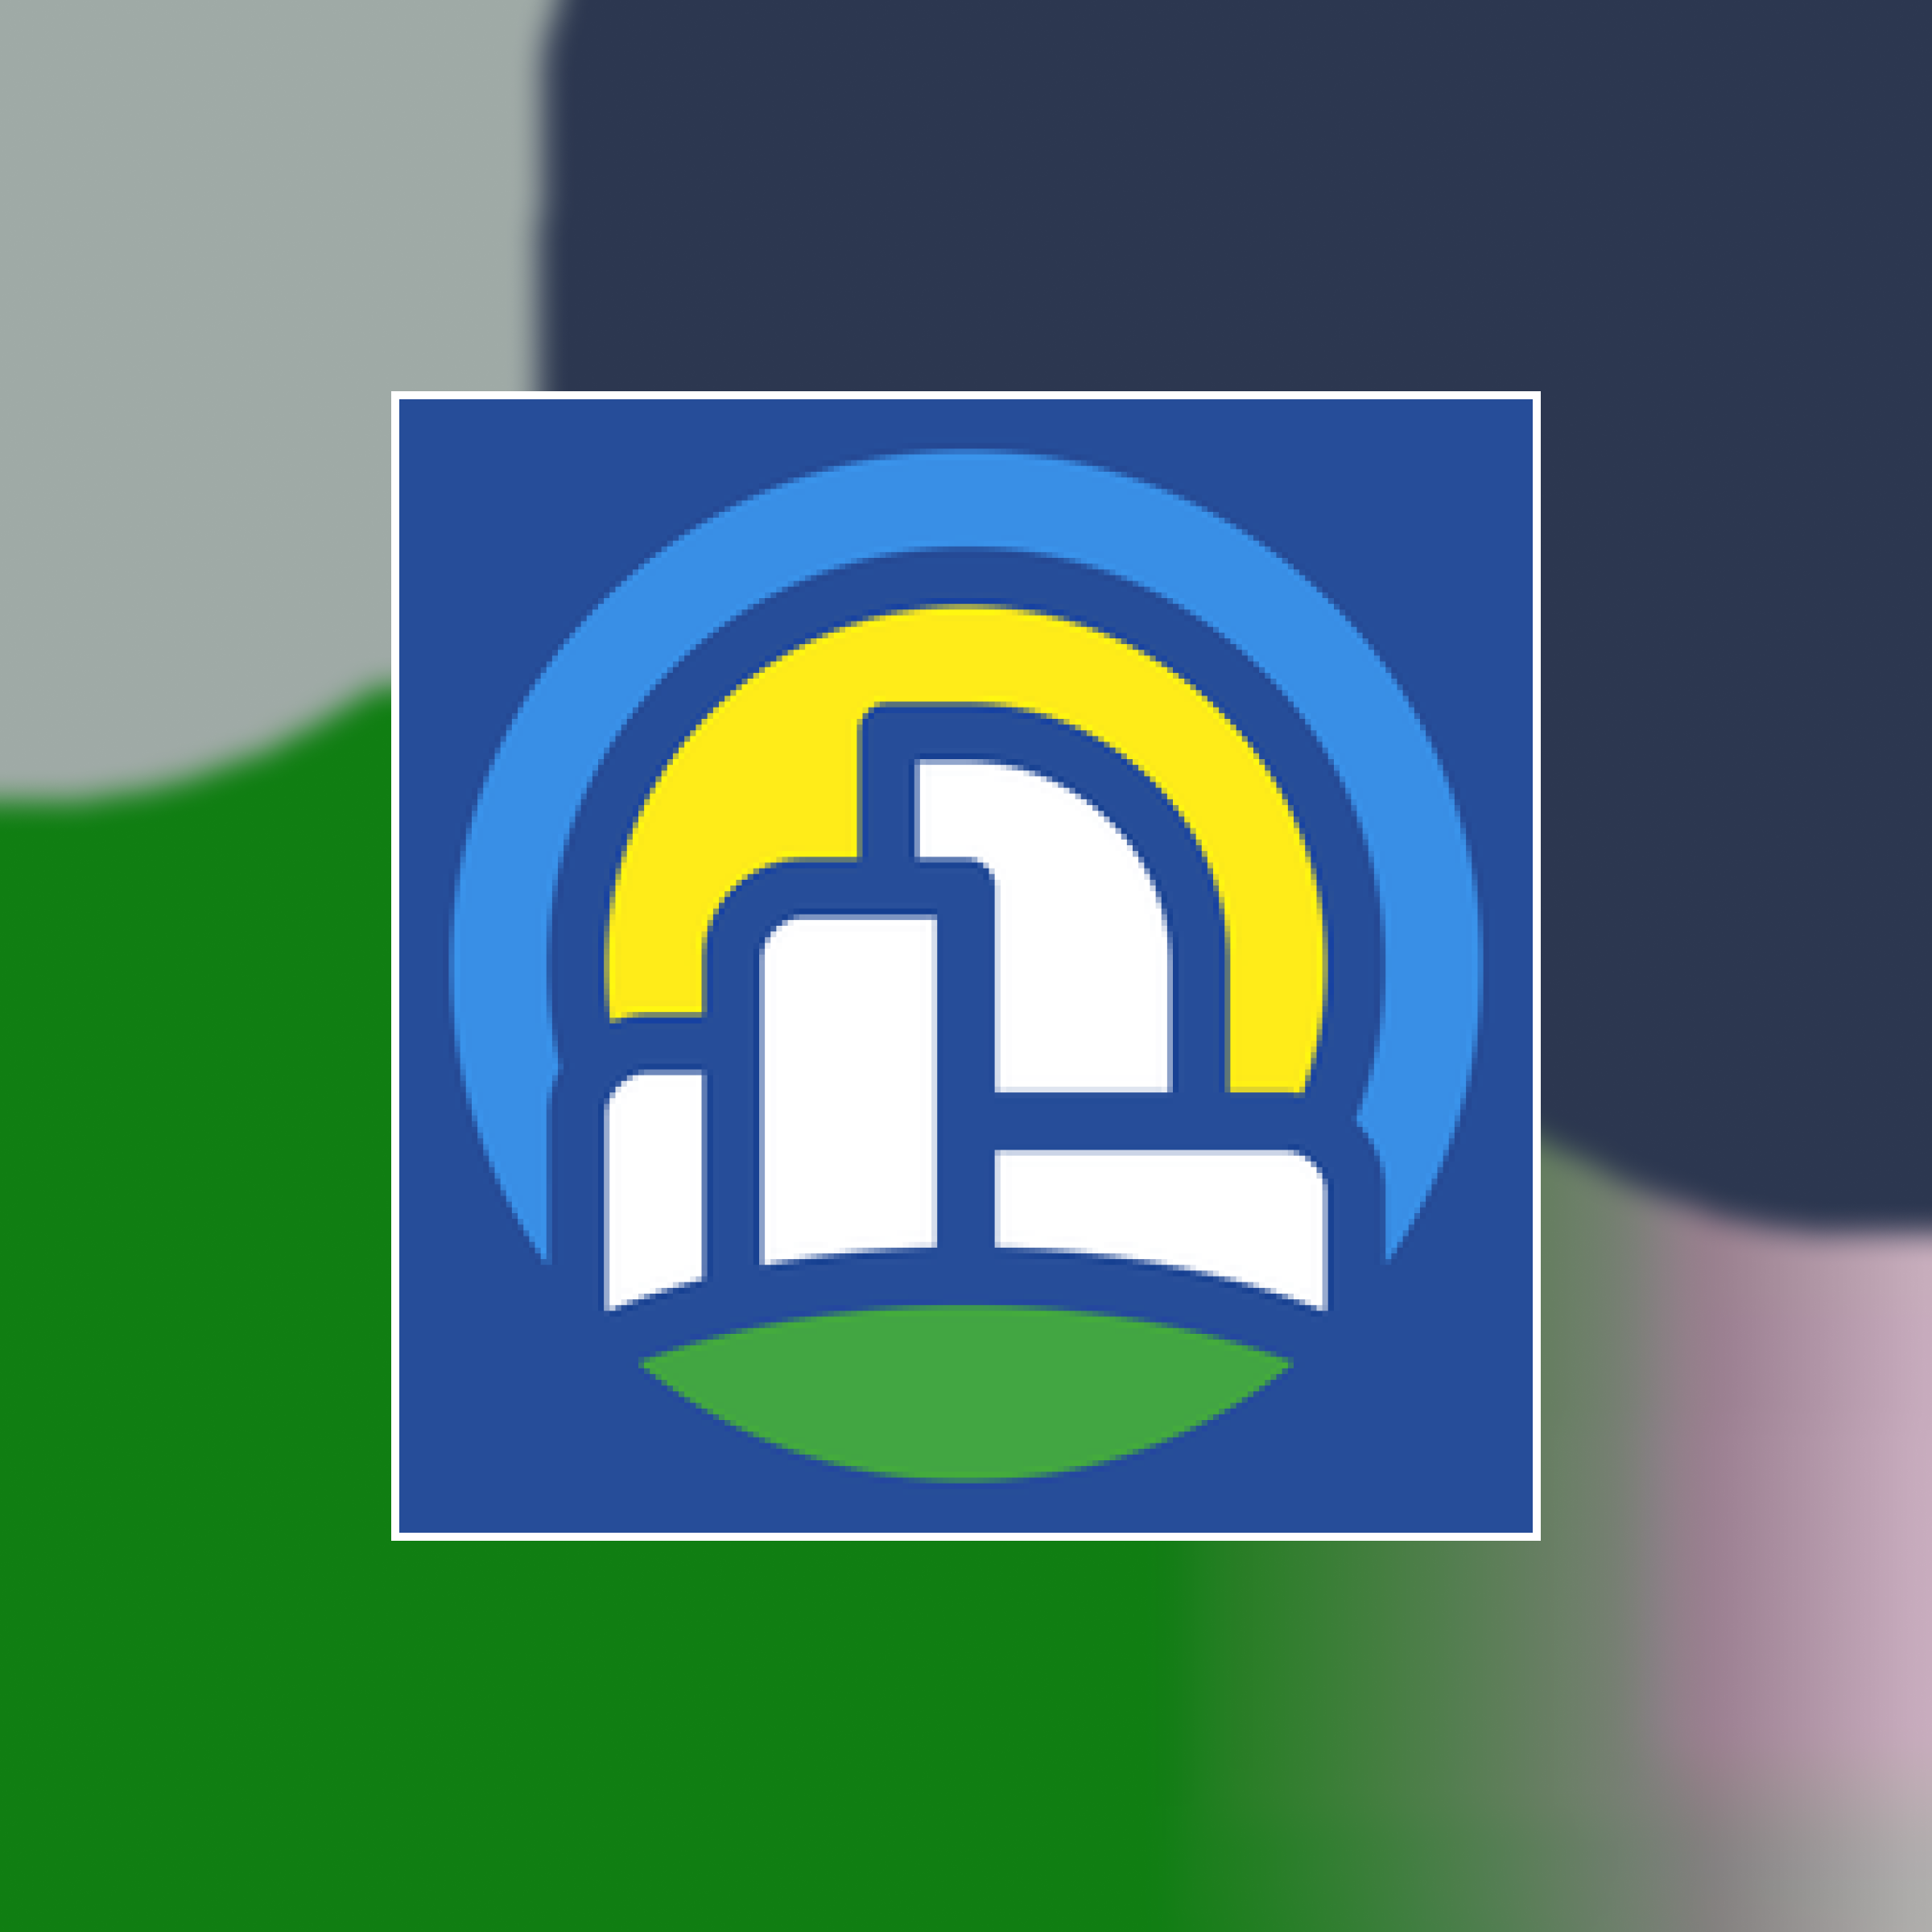 Logo of City Beautiful against a painted abstract background